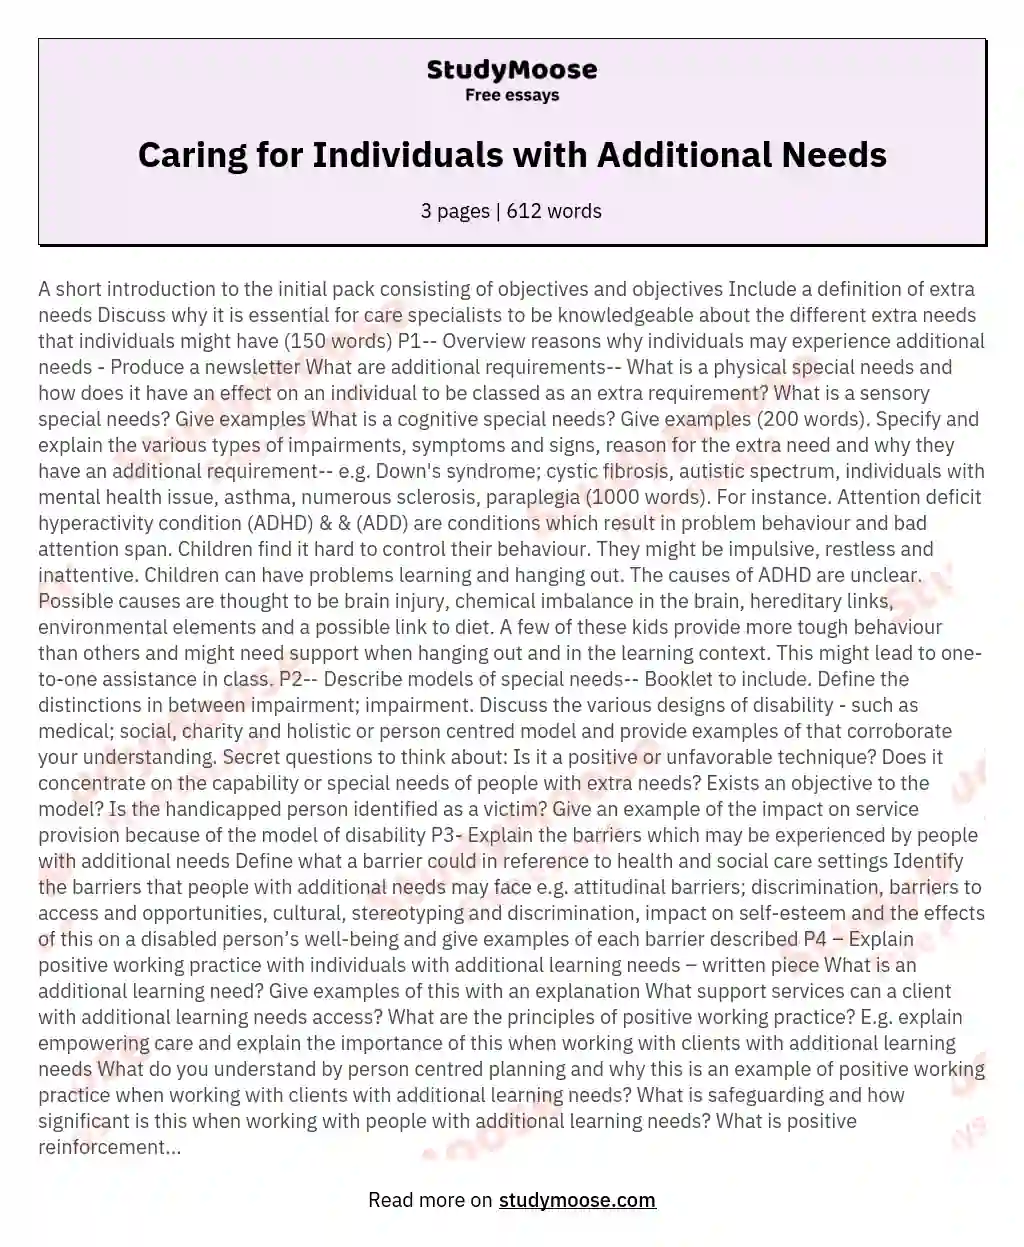 Caring for Individuals with Additional Needs essay